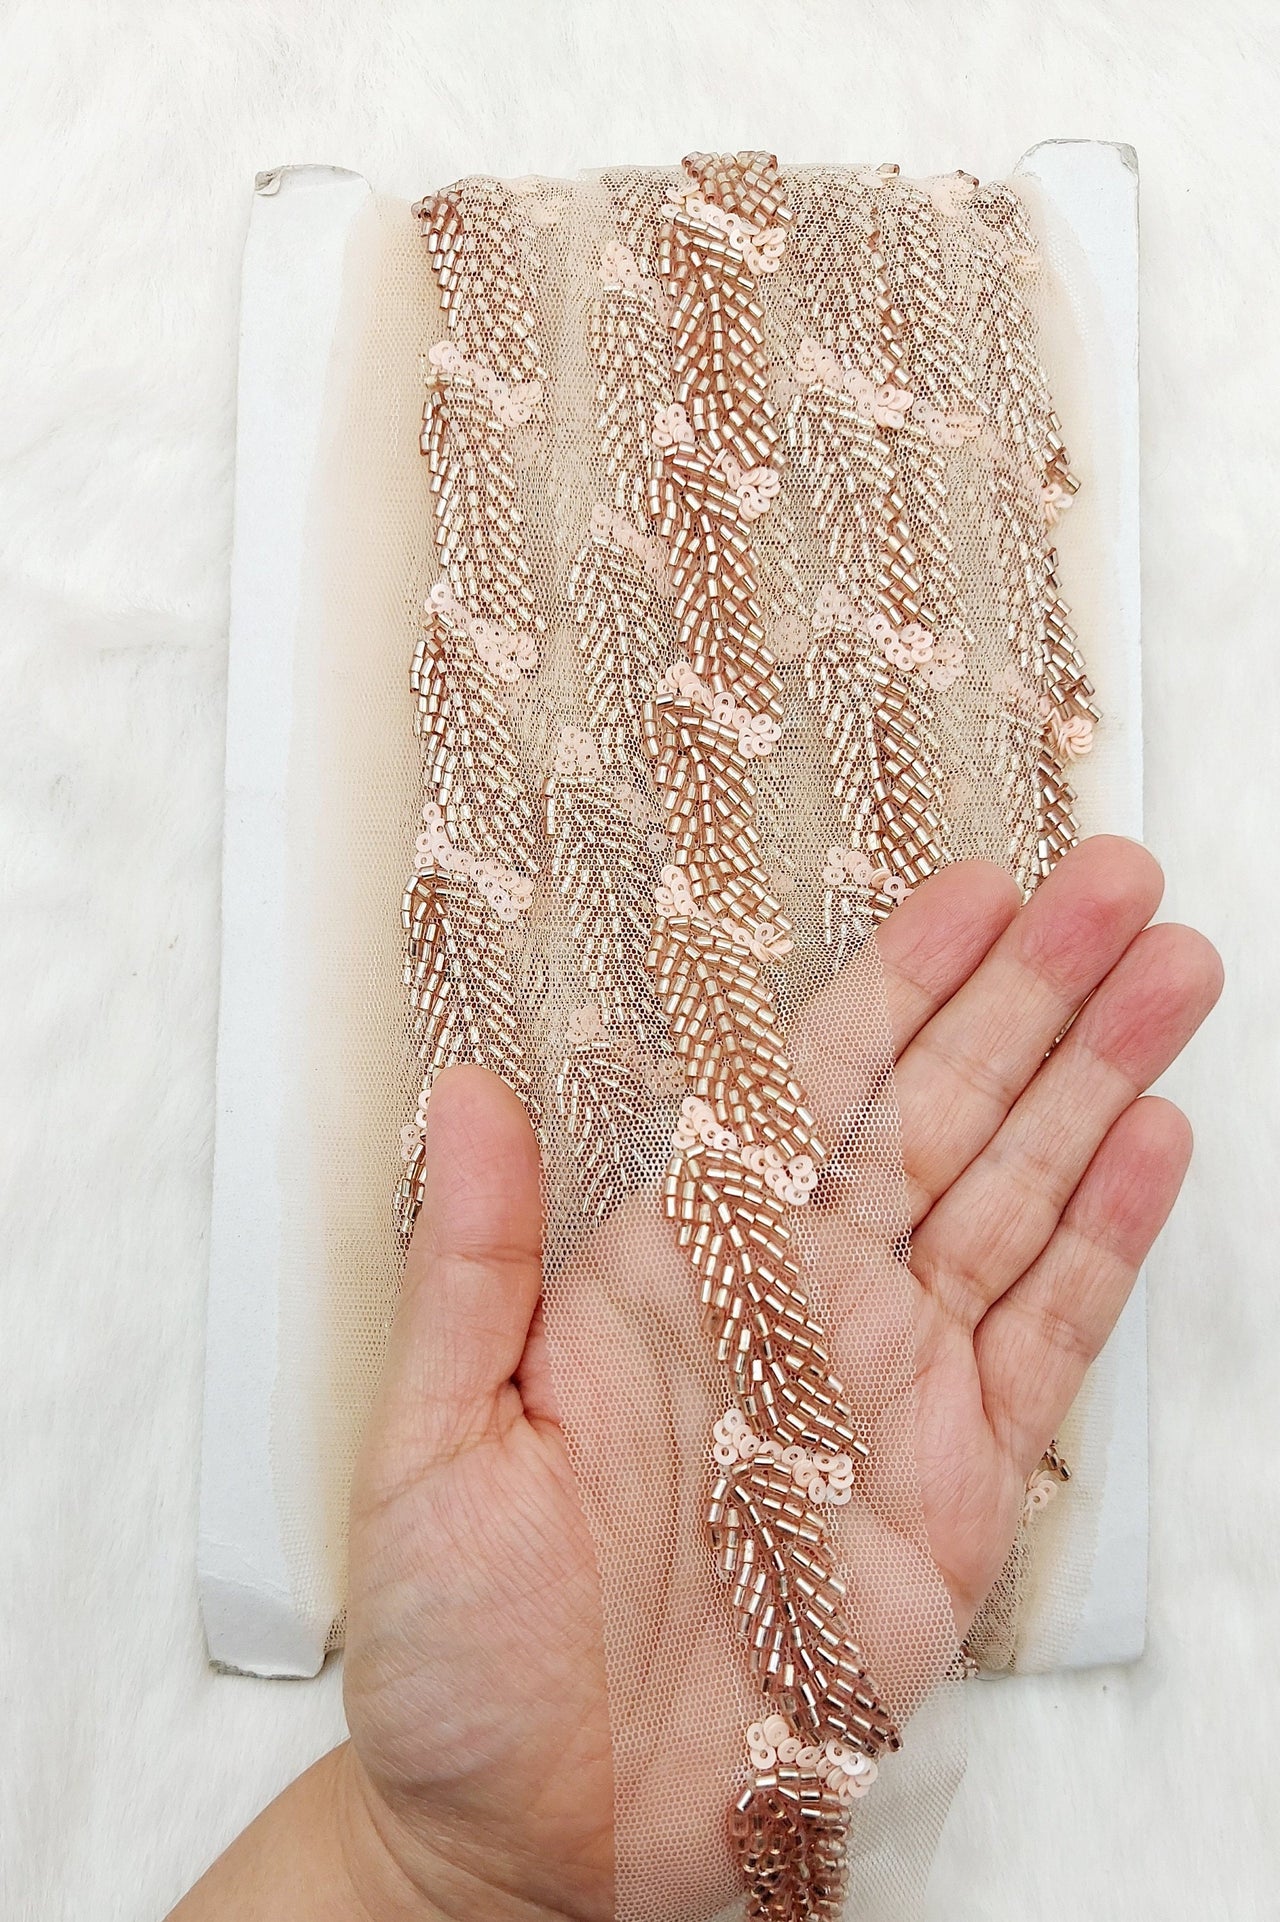 Beige Net Bridal Trim Rose Gold Beaded Leaf Embroidery, Hand Embroidered Bead Lace, Floral Embroidered Trim